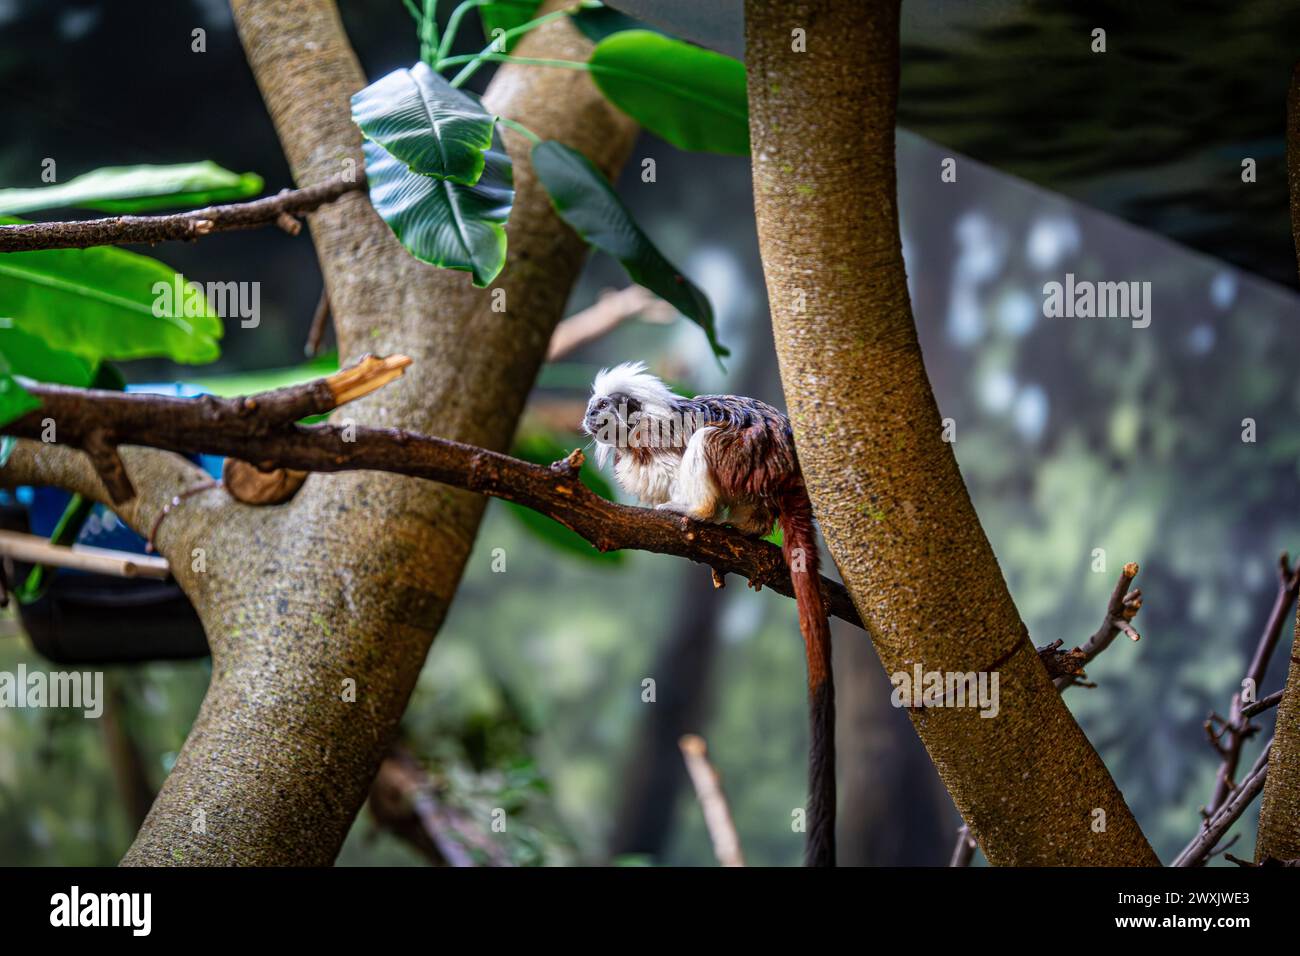 A monkey perched in a tree, enjoying fruits from the branches Stock Photo